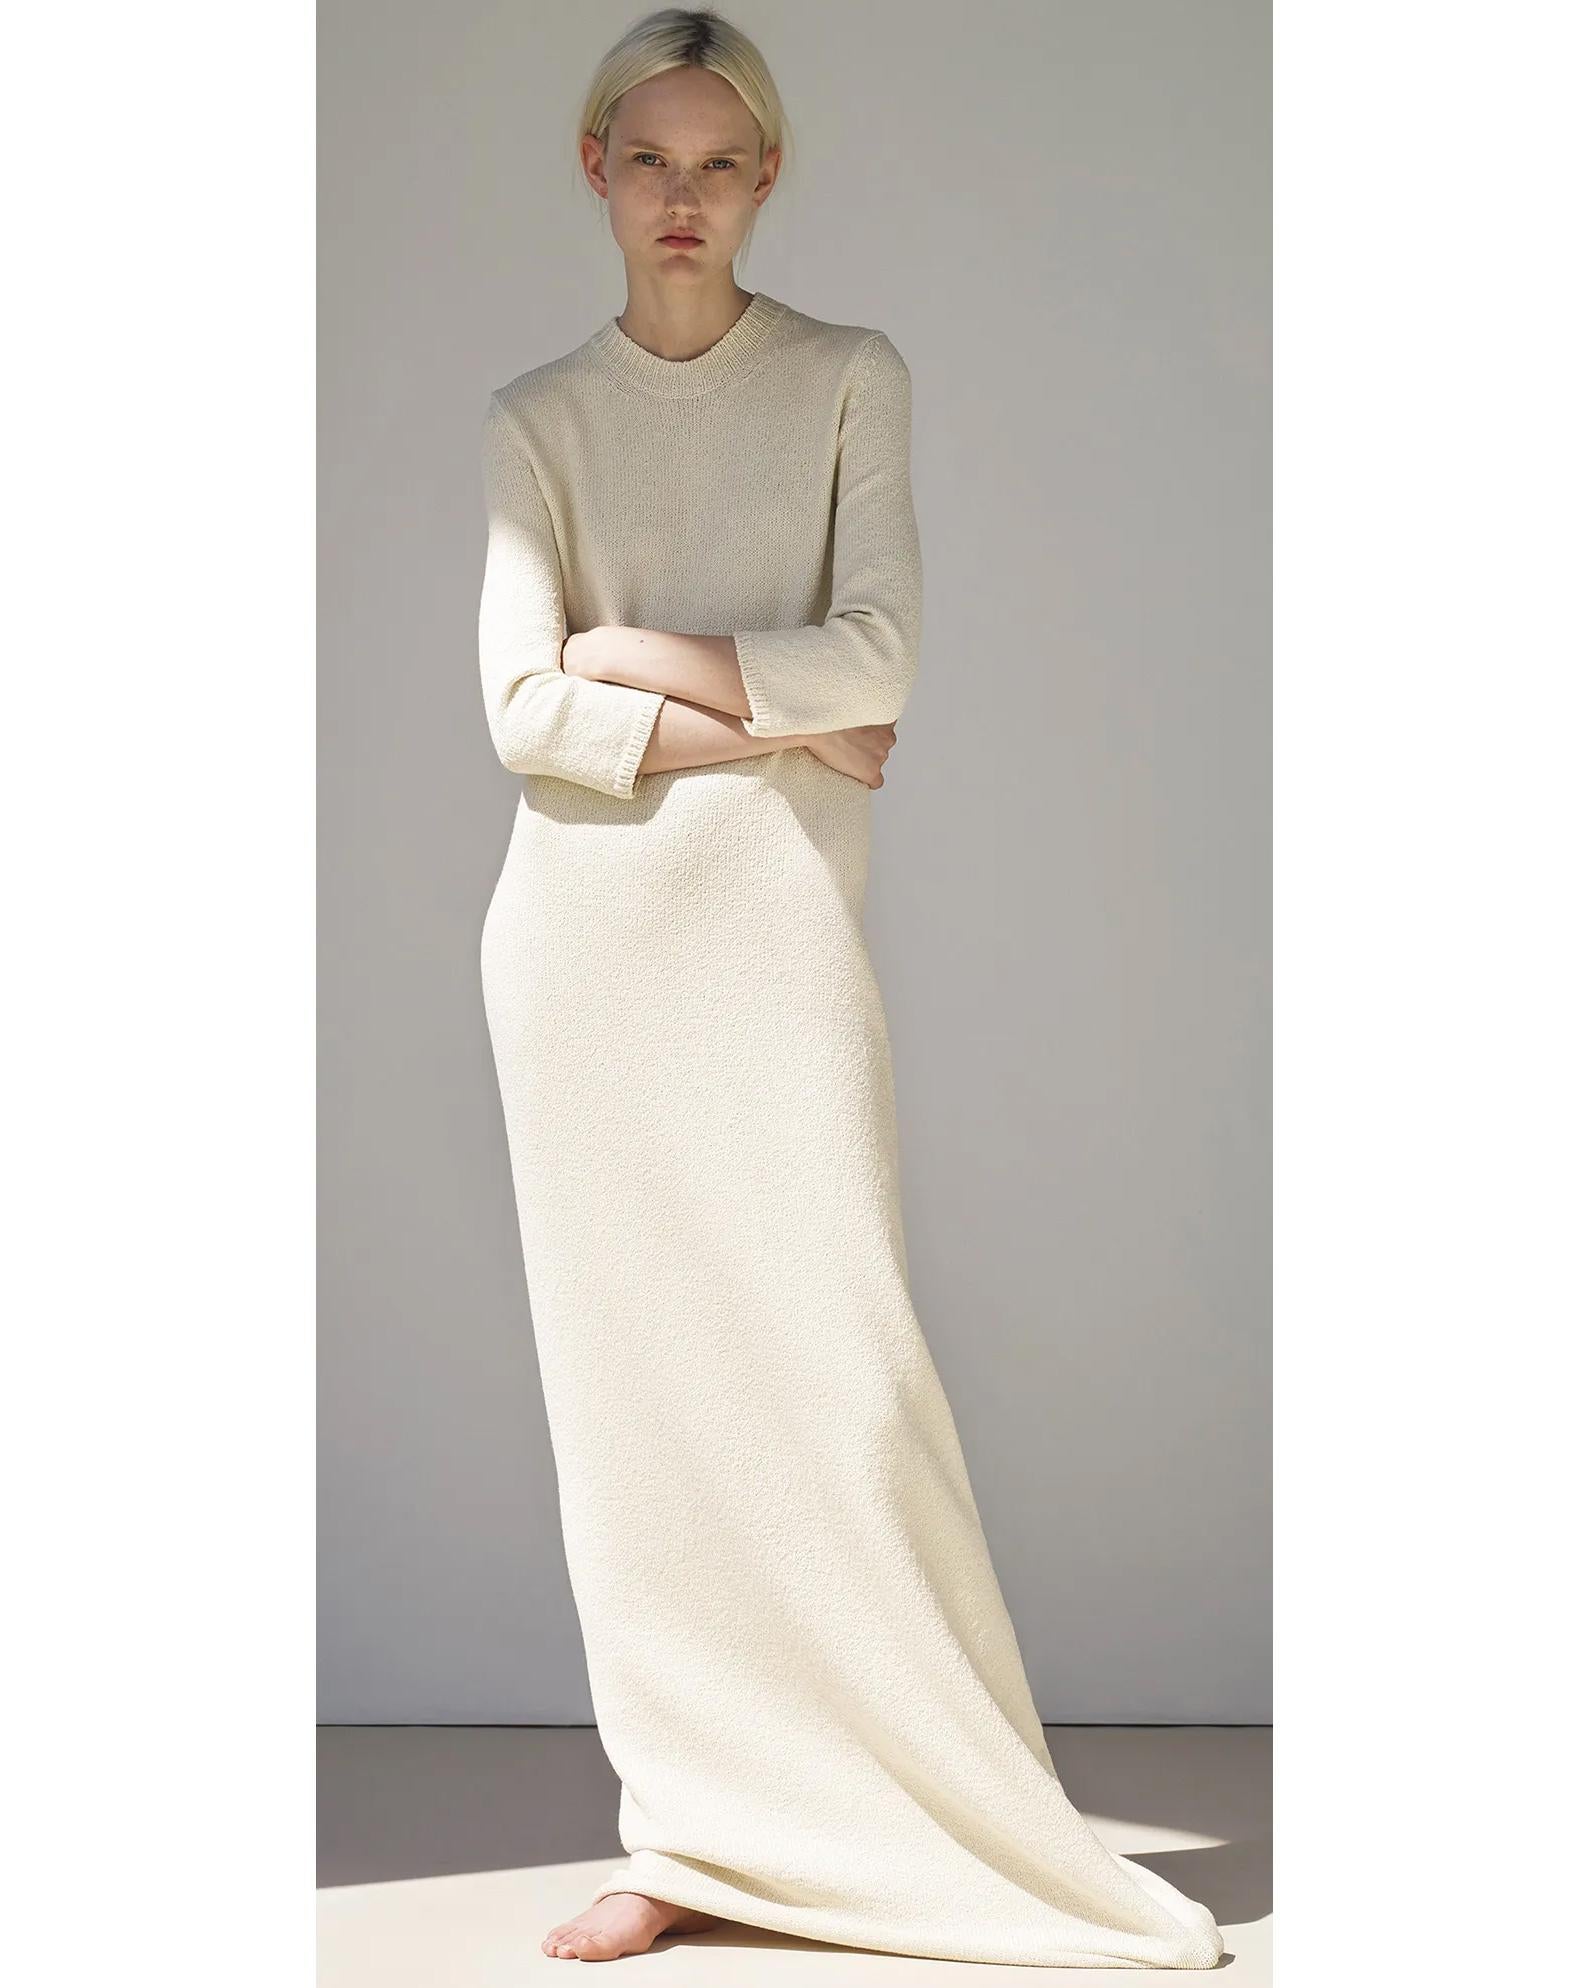 Resort 2015 Céline by Phoebe Philo wool blend scoop neck cream knit dress. Long scoop neck boucle knit dress with three-quarter sleeves and open slit at back hem. Has minor stretch that can accommodate a range of sizes depending on desired fit.